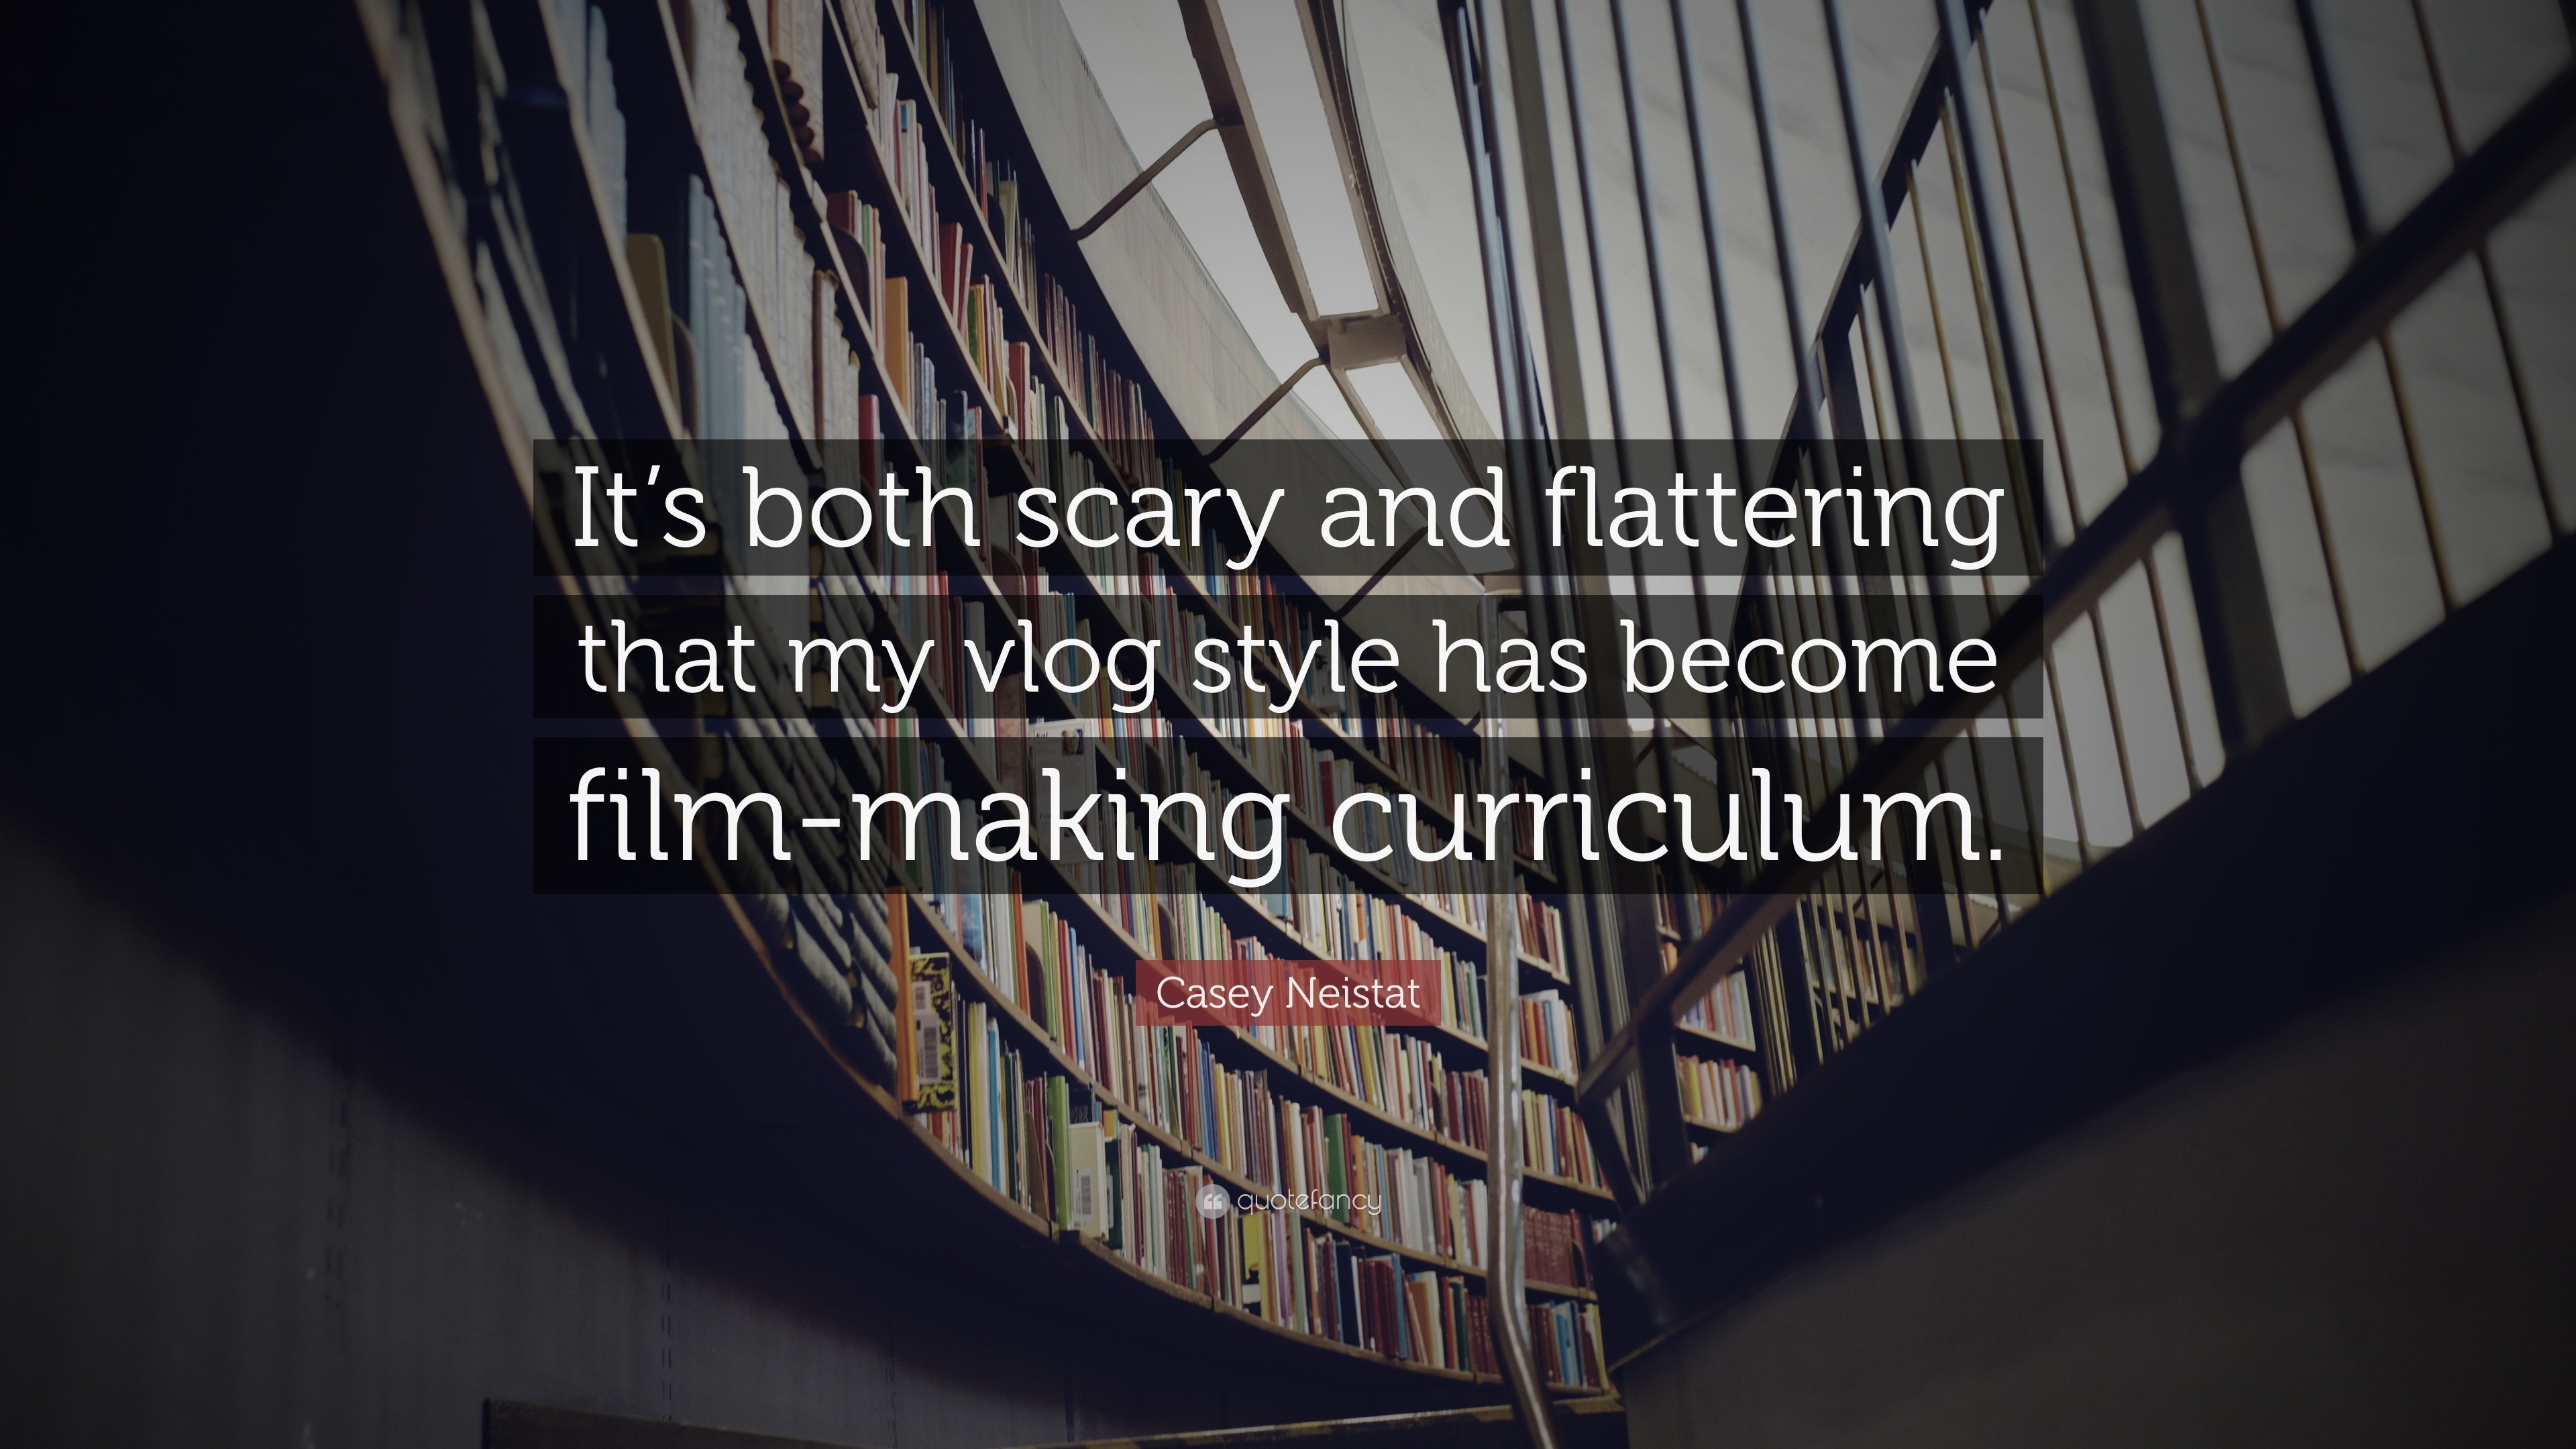 3840x2160 Casey Neistat Quote: “It's both scary and flattering that my vlog style has  become